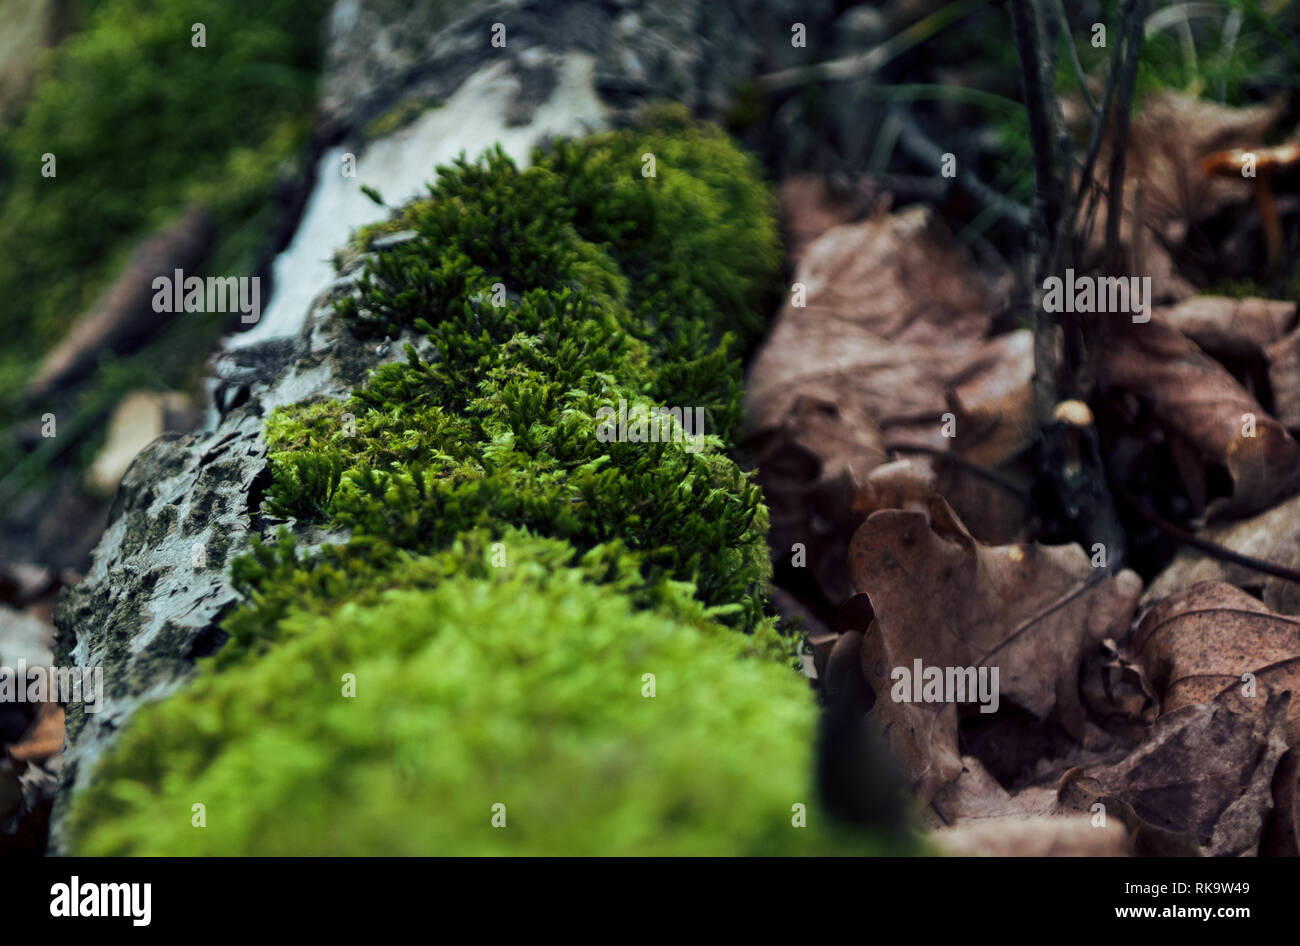 Moss in a forest / Gemeines Moos im Wald Stock Photo